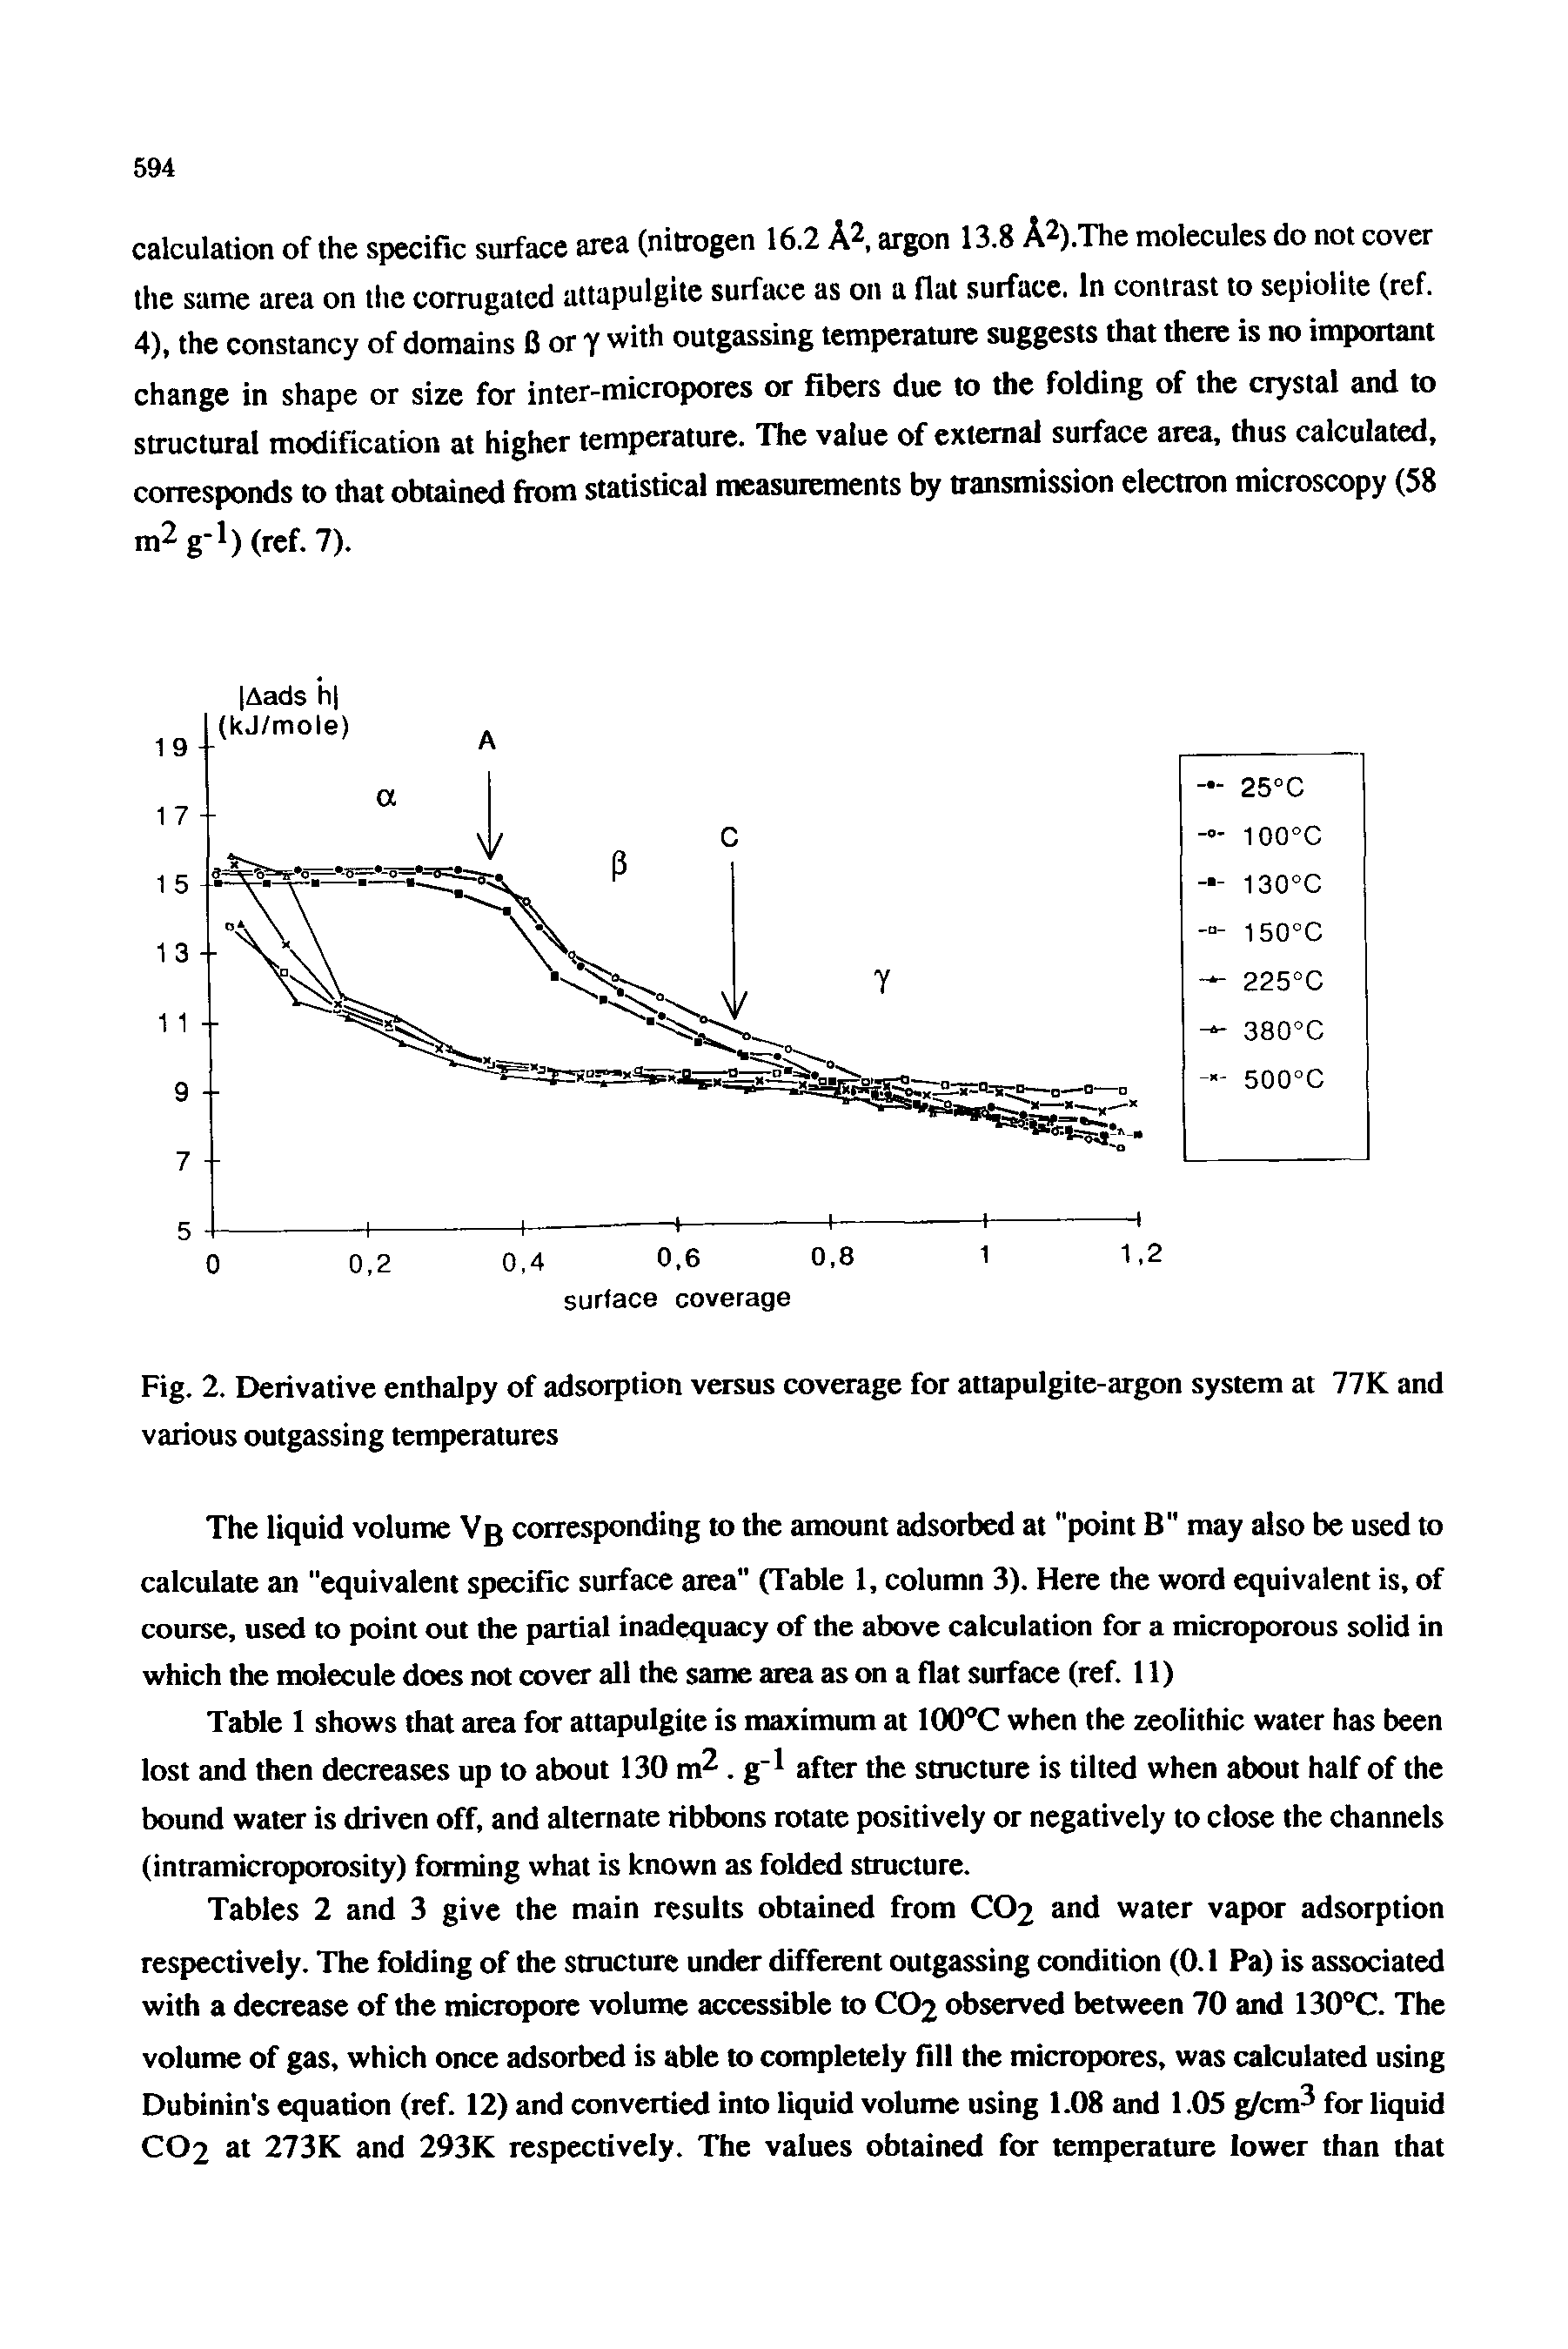 Tables 2 and 3 give the main results obtained from CO2 and water vapor adsorption respectively. The folding of the structure under different outgassing condition (0.1 Pa) is associated with a decrease of the micropore volume accessible to CO2 observed between 70 and 130°C. The volume of gas, which once adsorbed is able to completely fdl the micropores, was calculated using Dubinin s equation (ref. 12) and conveitied into liquid volume using 1.08 and l.OS g/cm for liquid CO2 at 273K and 293K respectively. The values obtained for temperature lower than that...